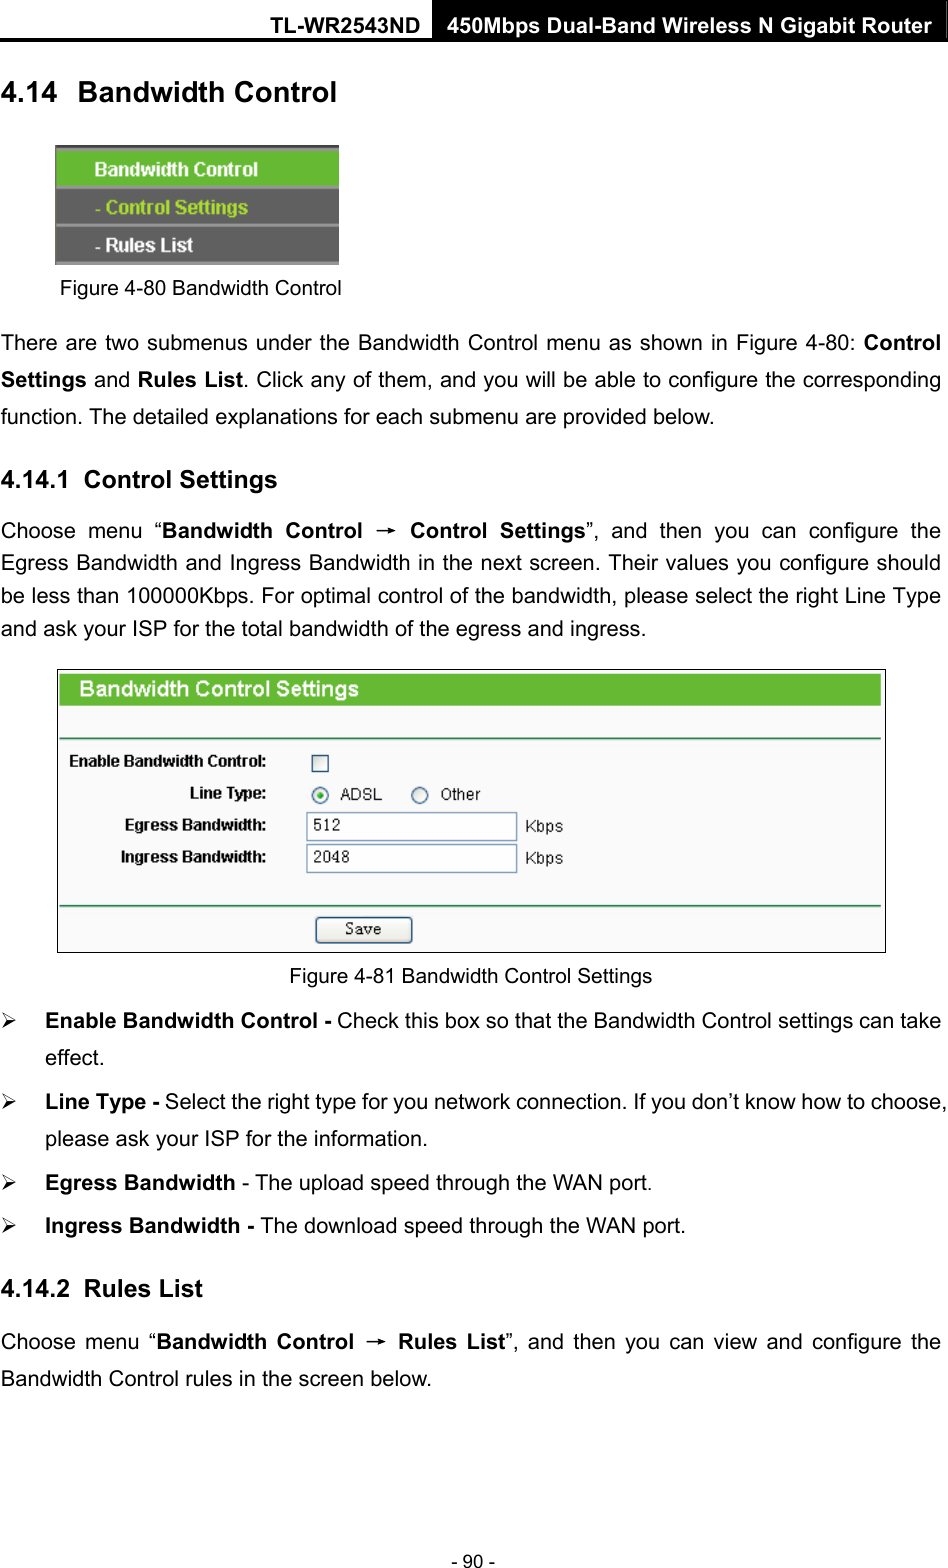 TL-WR2543ND 450Mbps Dual-Band Wireless N Gigabit Router - 90 - 4.14  Bandwidth Control  Figure 4-80 Bandwidth Control There are two submenus under the Bandwidth Control menu as shown in Figure 4-80: Control Settings and Rules List. Click any of them, and you will be able to configure the corresponding function. The detailed explanations for each submenu are provided below. 4.14.1  Control Settings Choose menu “Bandwidth Control → Control Settings”, and then you can configure the Egress Bandwidth and Ingress Bandwidth in the next screen. Their values you configure should be less than 100000Kbps. For optimal control of the bandwidth, please select the right Line Type and ask your ISP for the total bandwidth of the egress and ingress.  Figure 4-81 Bandwidth Control Settings ¾ Enable Bandwidth Control - Check this box so that the Bandwidth Control settings can take effect. ¾ Line Type - Select the right type for you network connection. If you don’t know how to choose, please ask your ISP for the information. ¾ Egress Bandwidth - The upload speed through the WAN port. ¾ Ingress Bandwidth - The download speed through the WAN port. 4.14.2  Rules List Choose menu “Bandwidth Control → Rules List”, and then you can view and configure the Bandwidth Control rules in the screen below. 